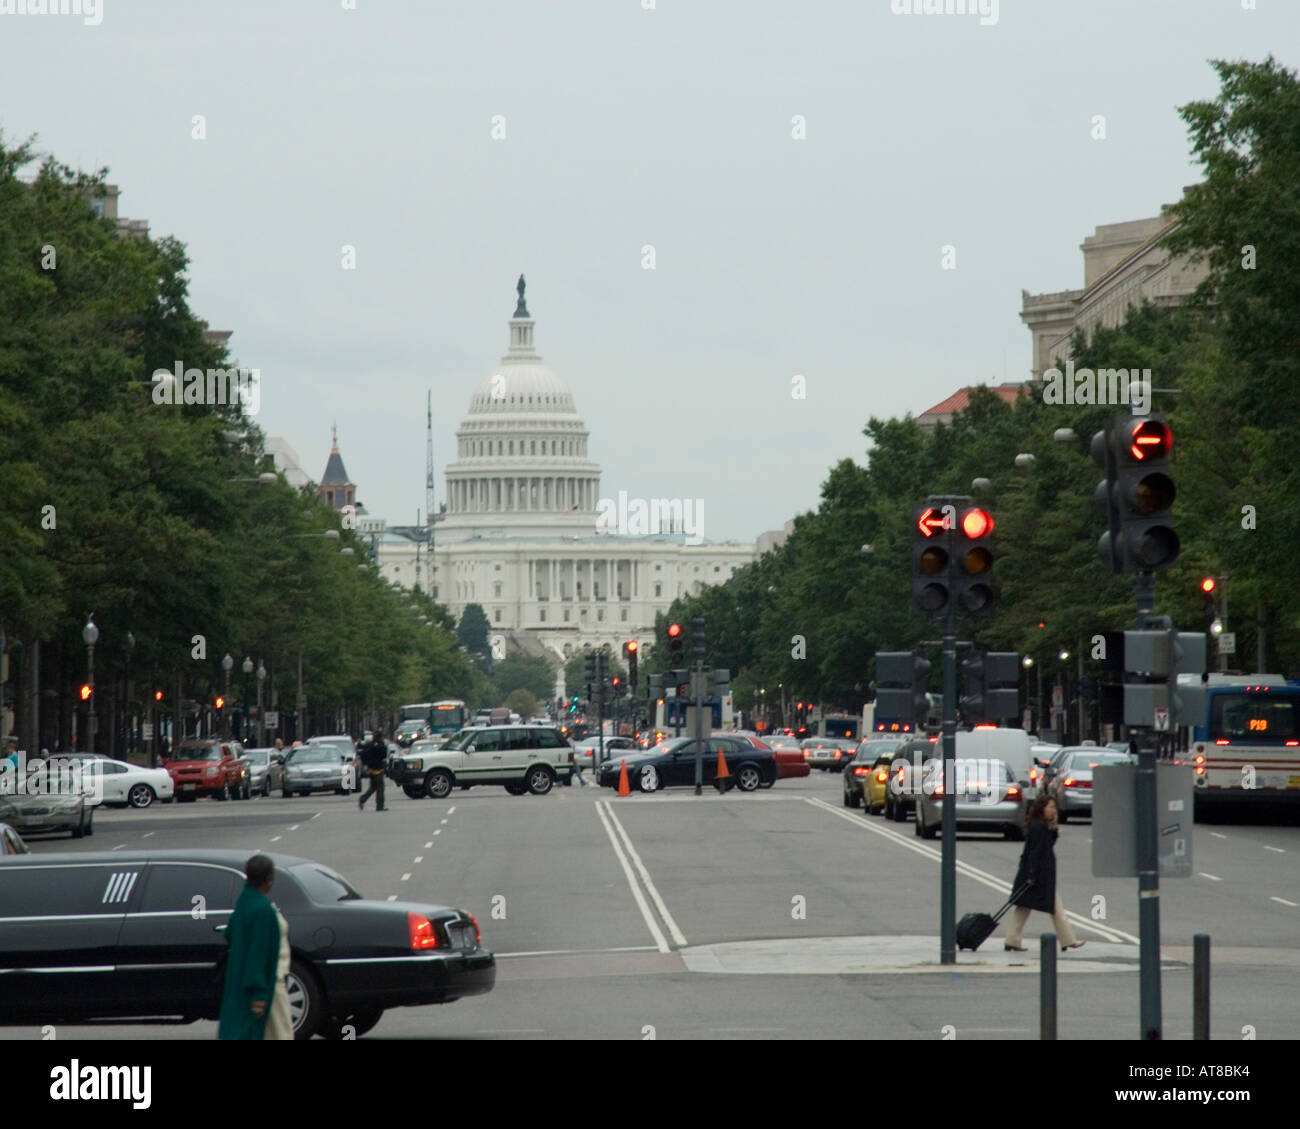 The United States Capitol Building Washington DC United States of America As seen from Pennsylvania Avenue Stock Photo